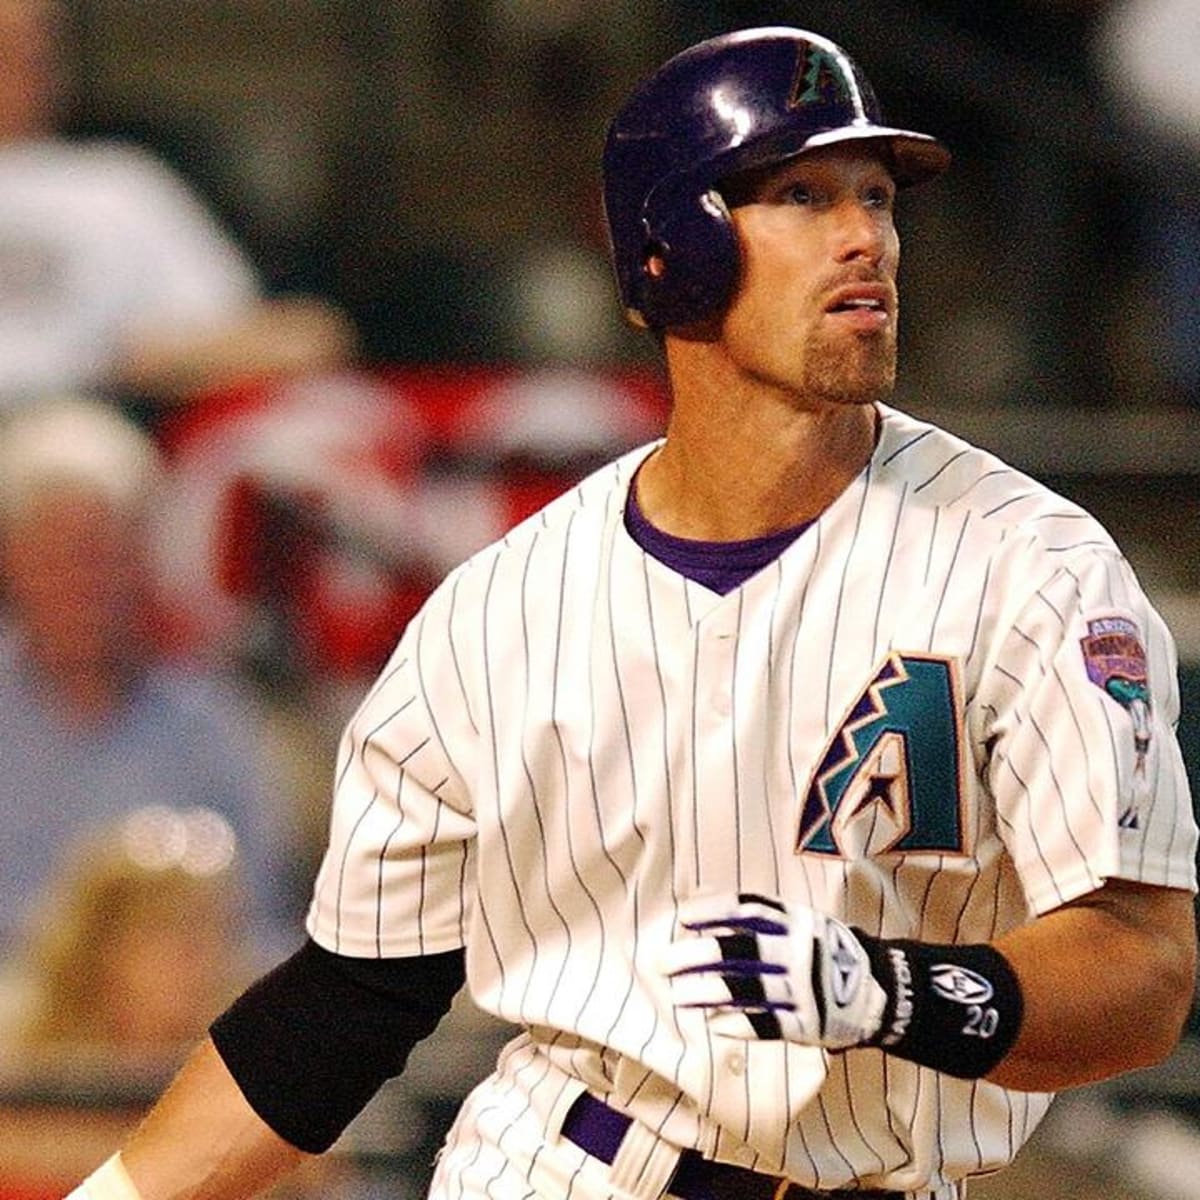 Luis Gonzalez helps woman involved in fiery car crash - Sports Illustrated